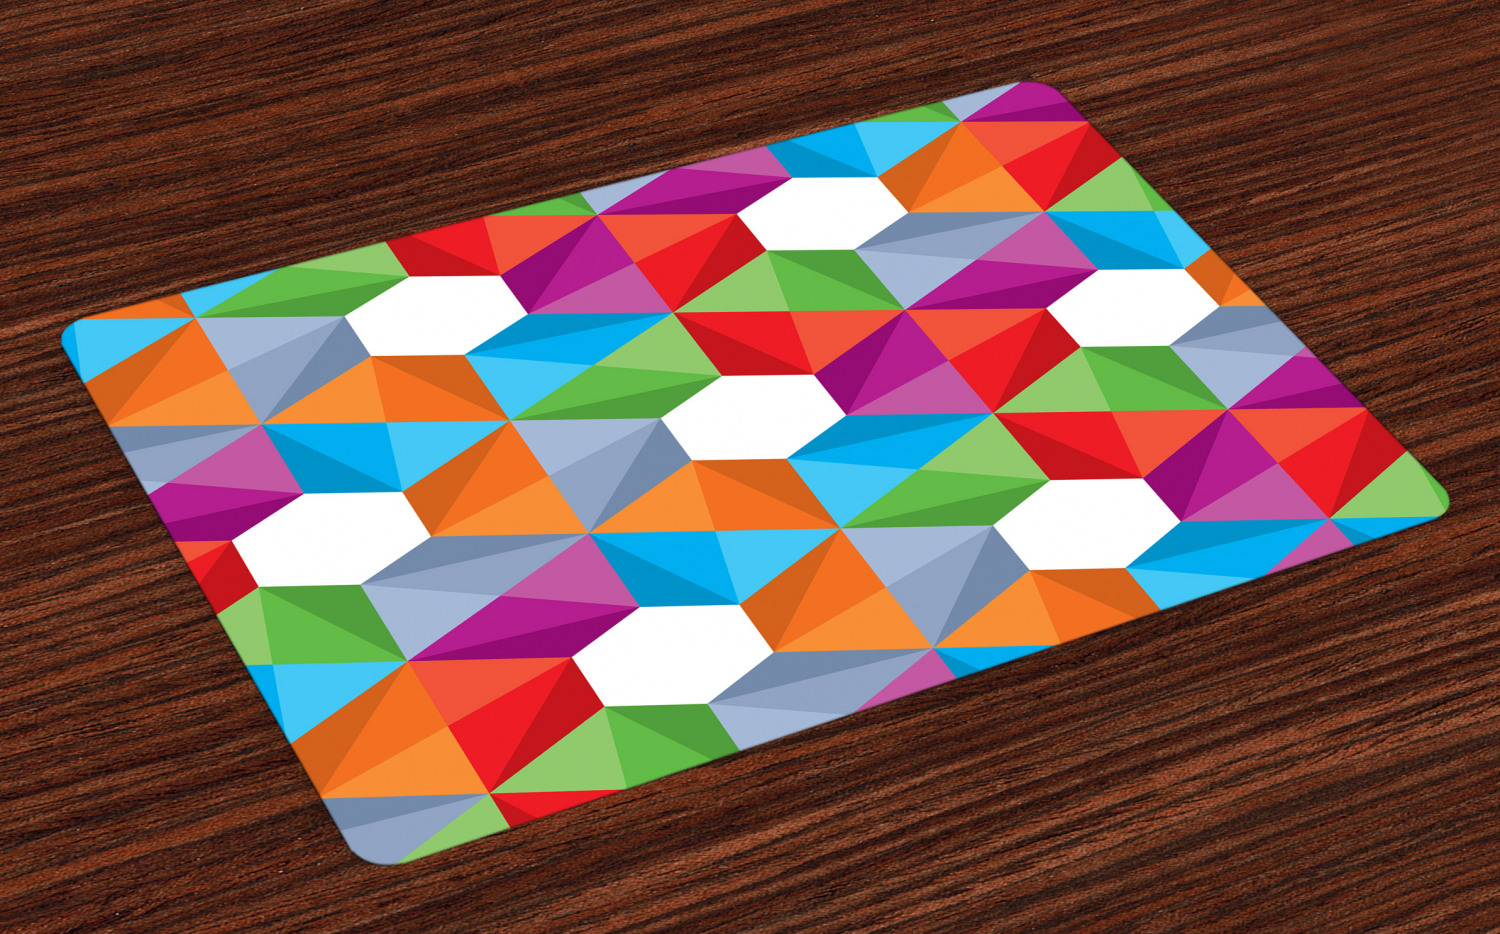 Mod Triangles Cloth Placemats by Spoonflower Set of 4 Geometric Placemats - Rainbow Triangle Cheater Quilt by theartwerks